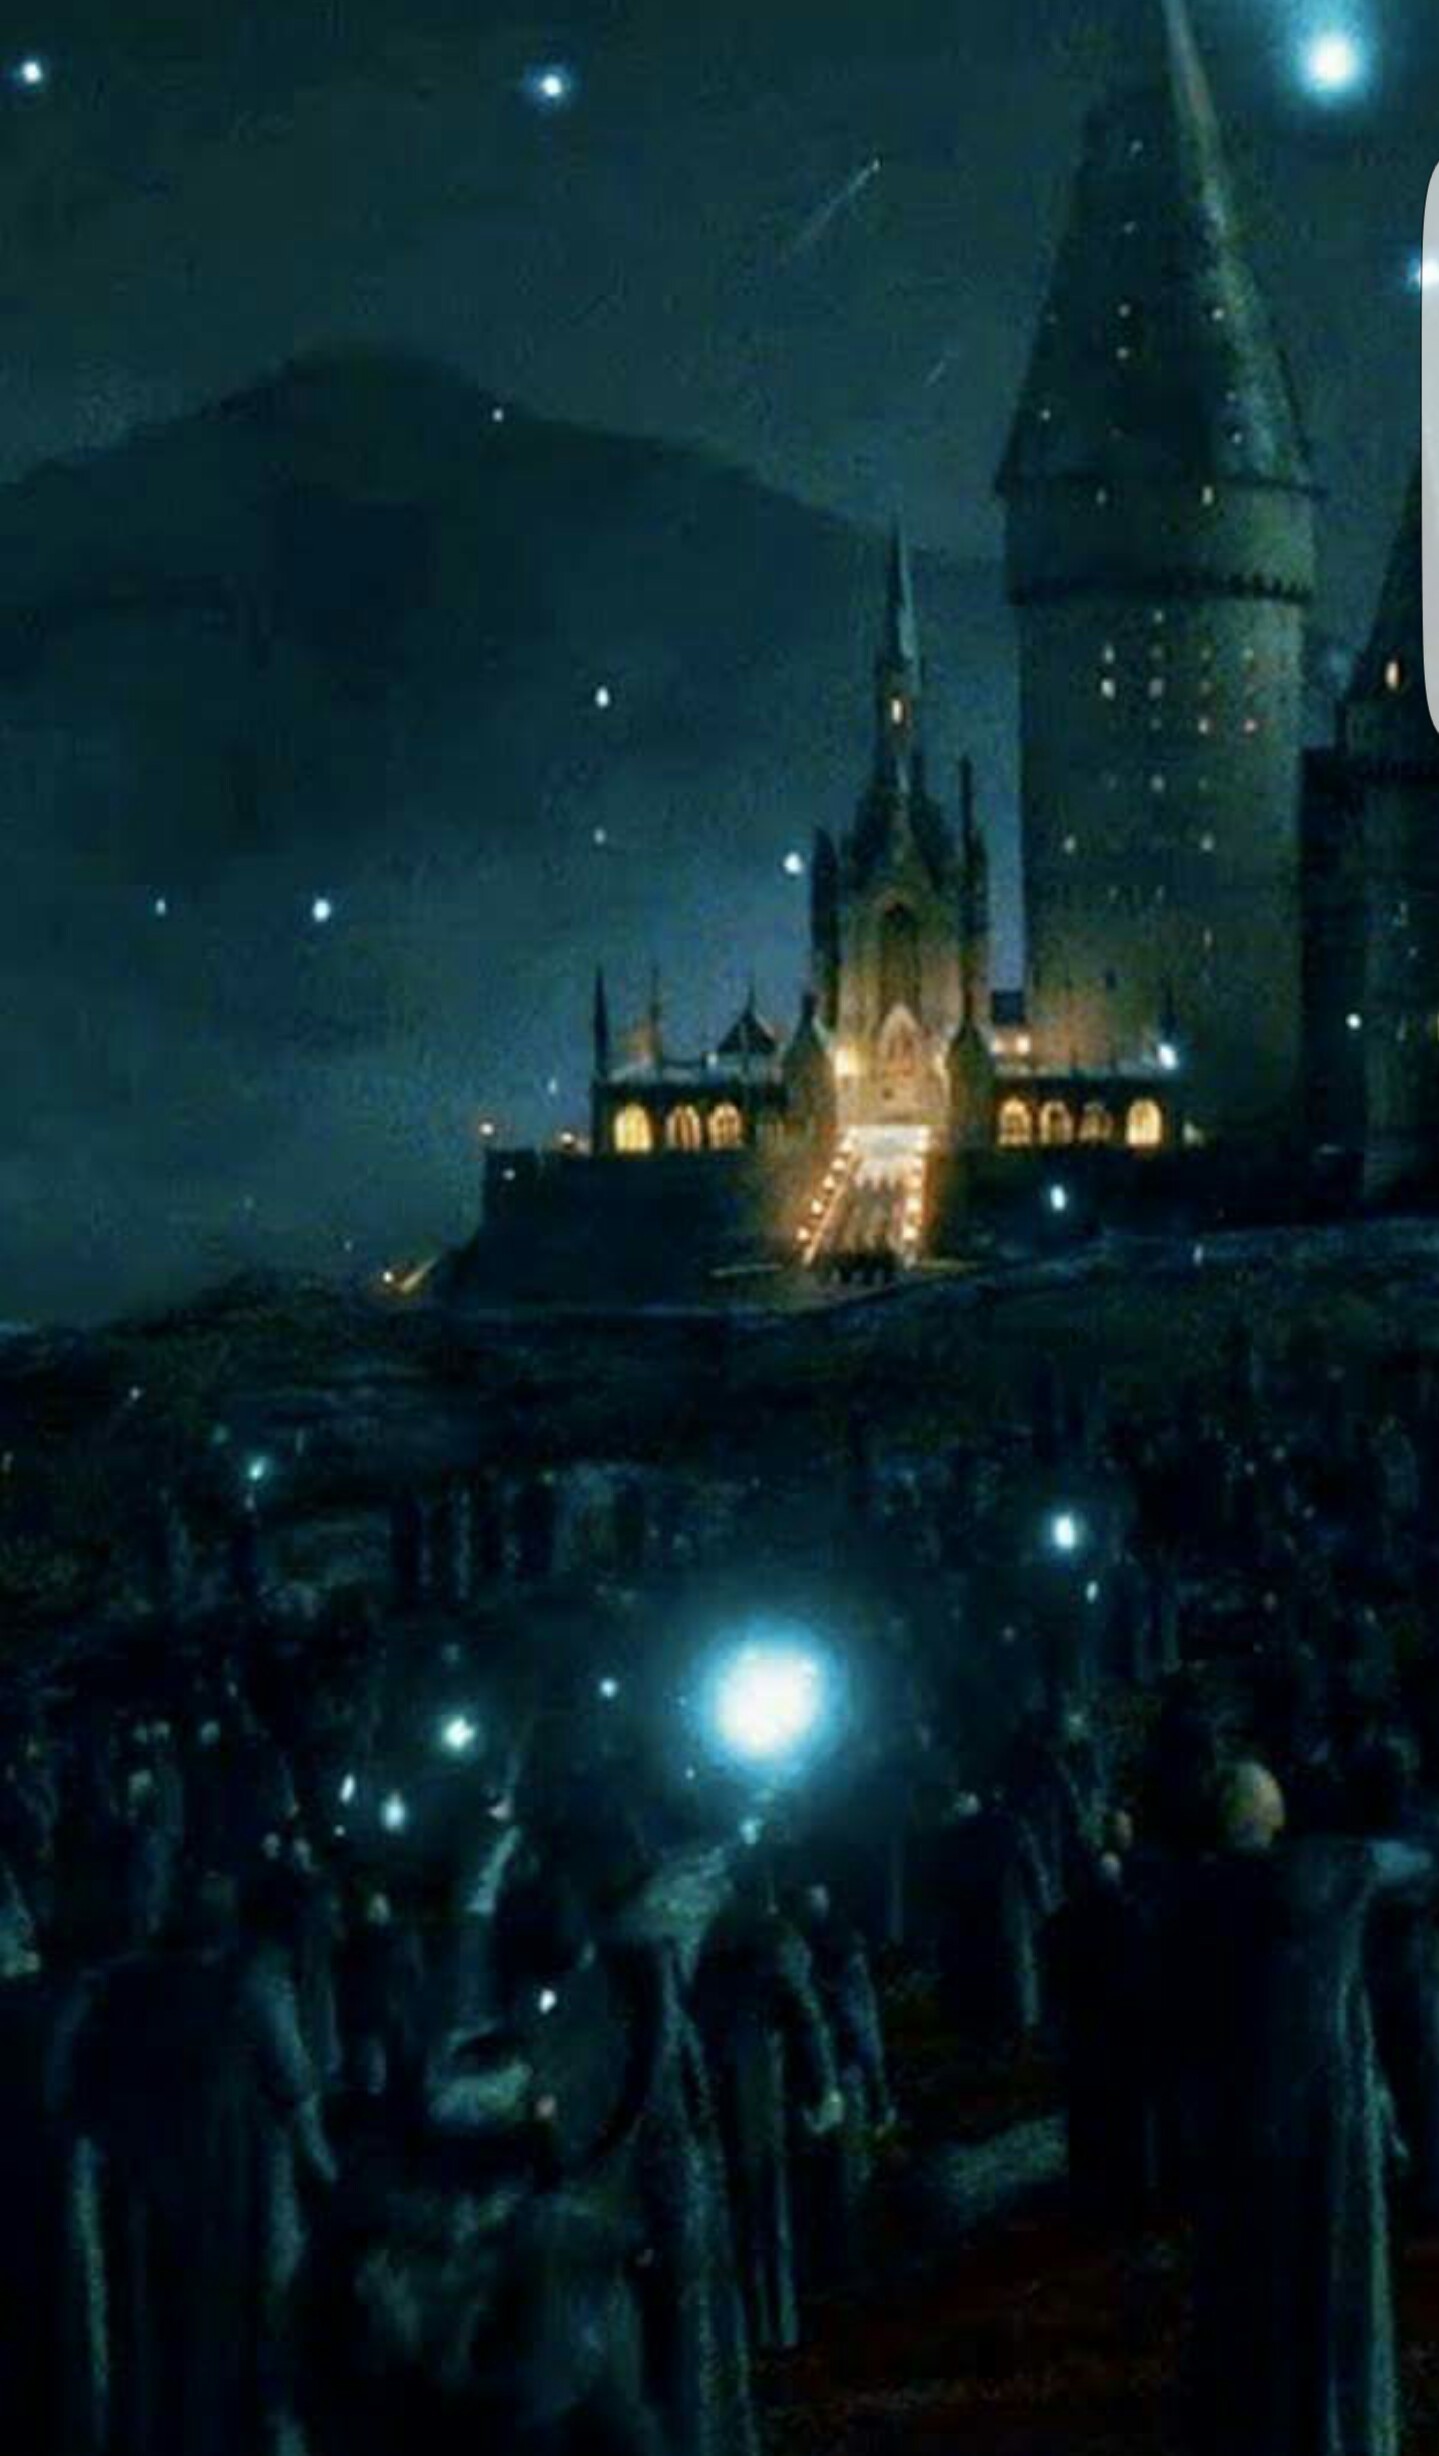 Raise your wands for the fallen